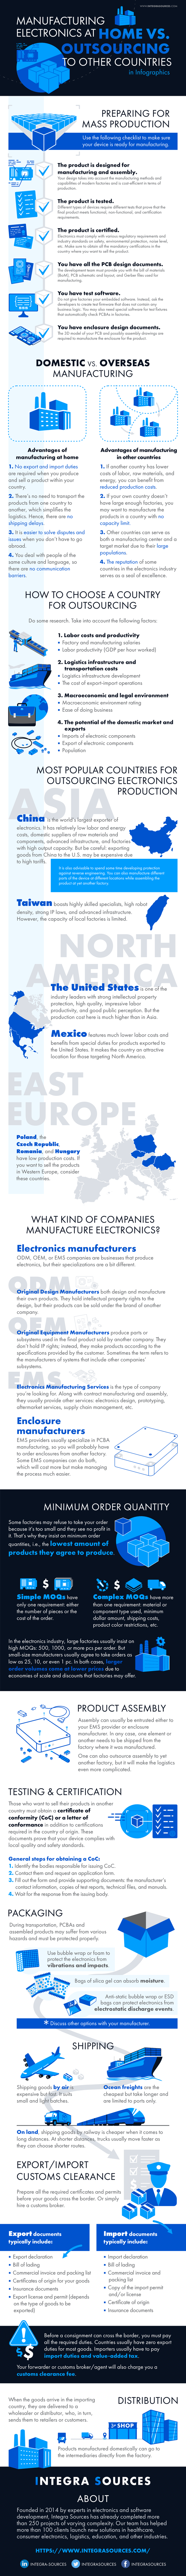 Manufacturing electronics at home vs outsourcing to other countries infographic by Integra Sources.